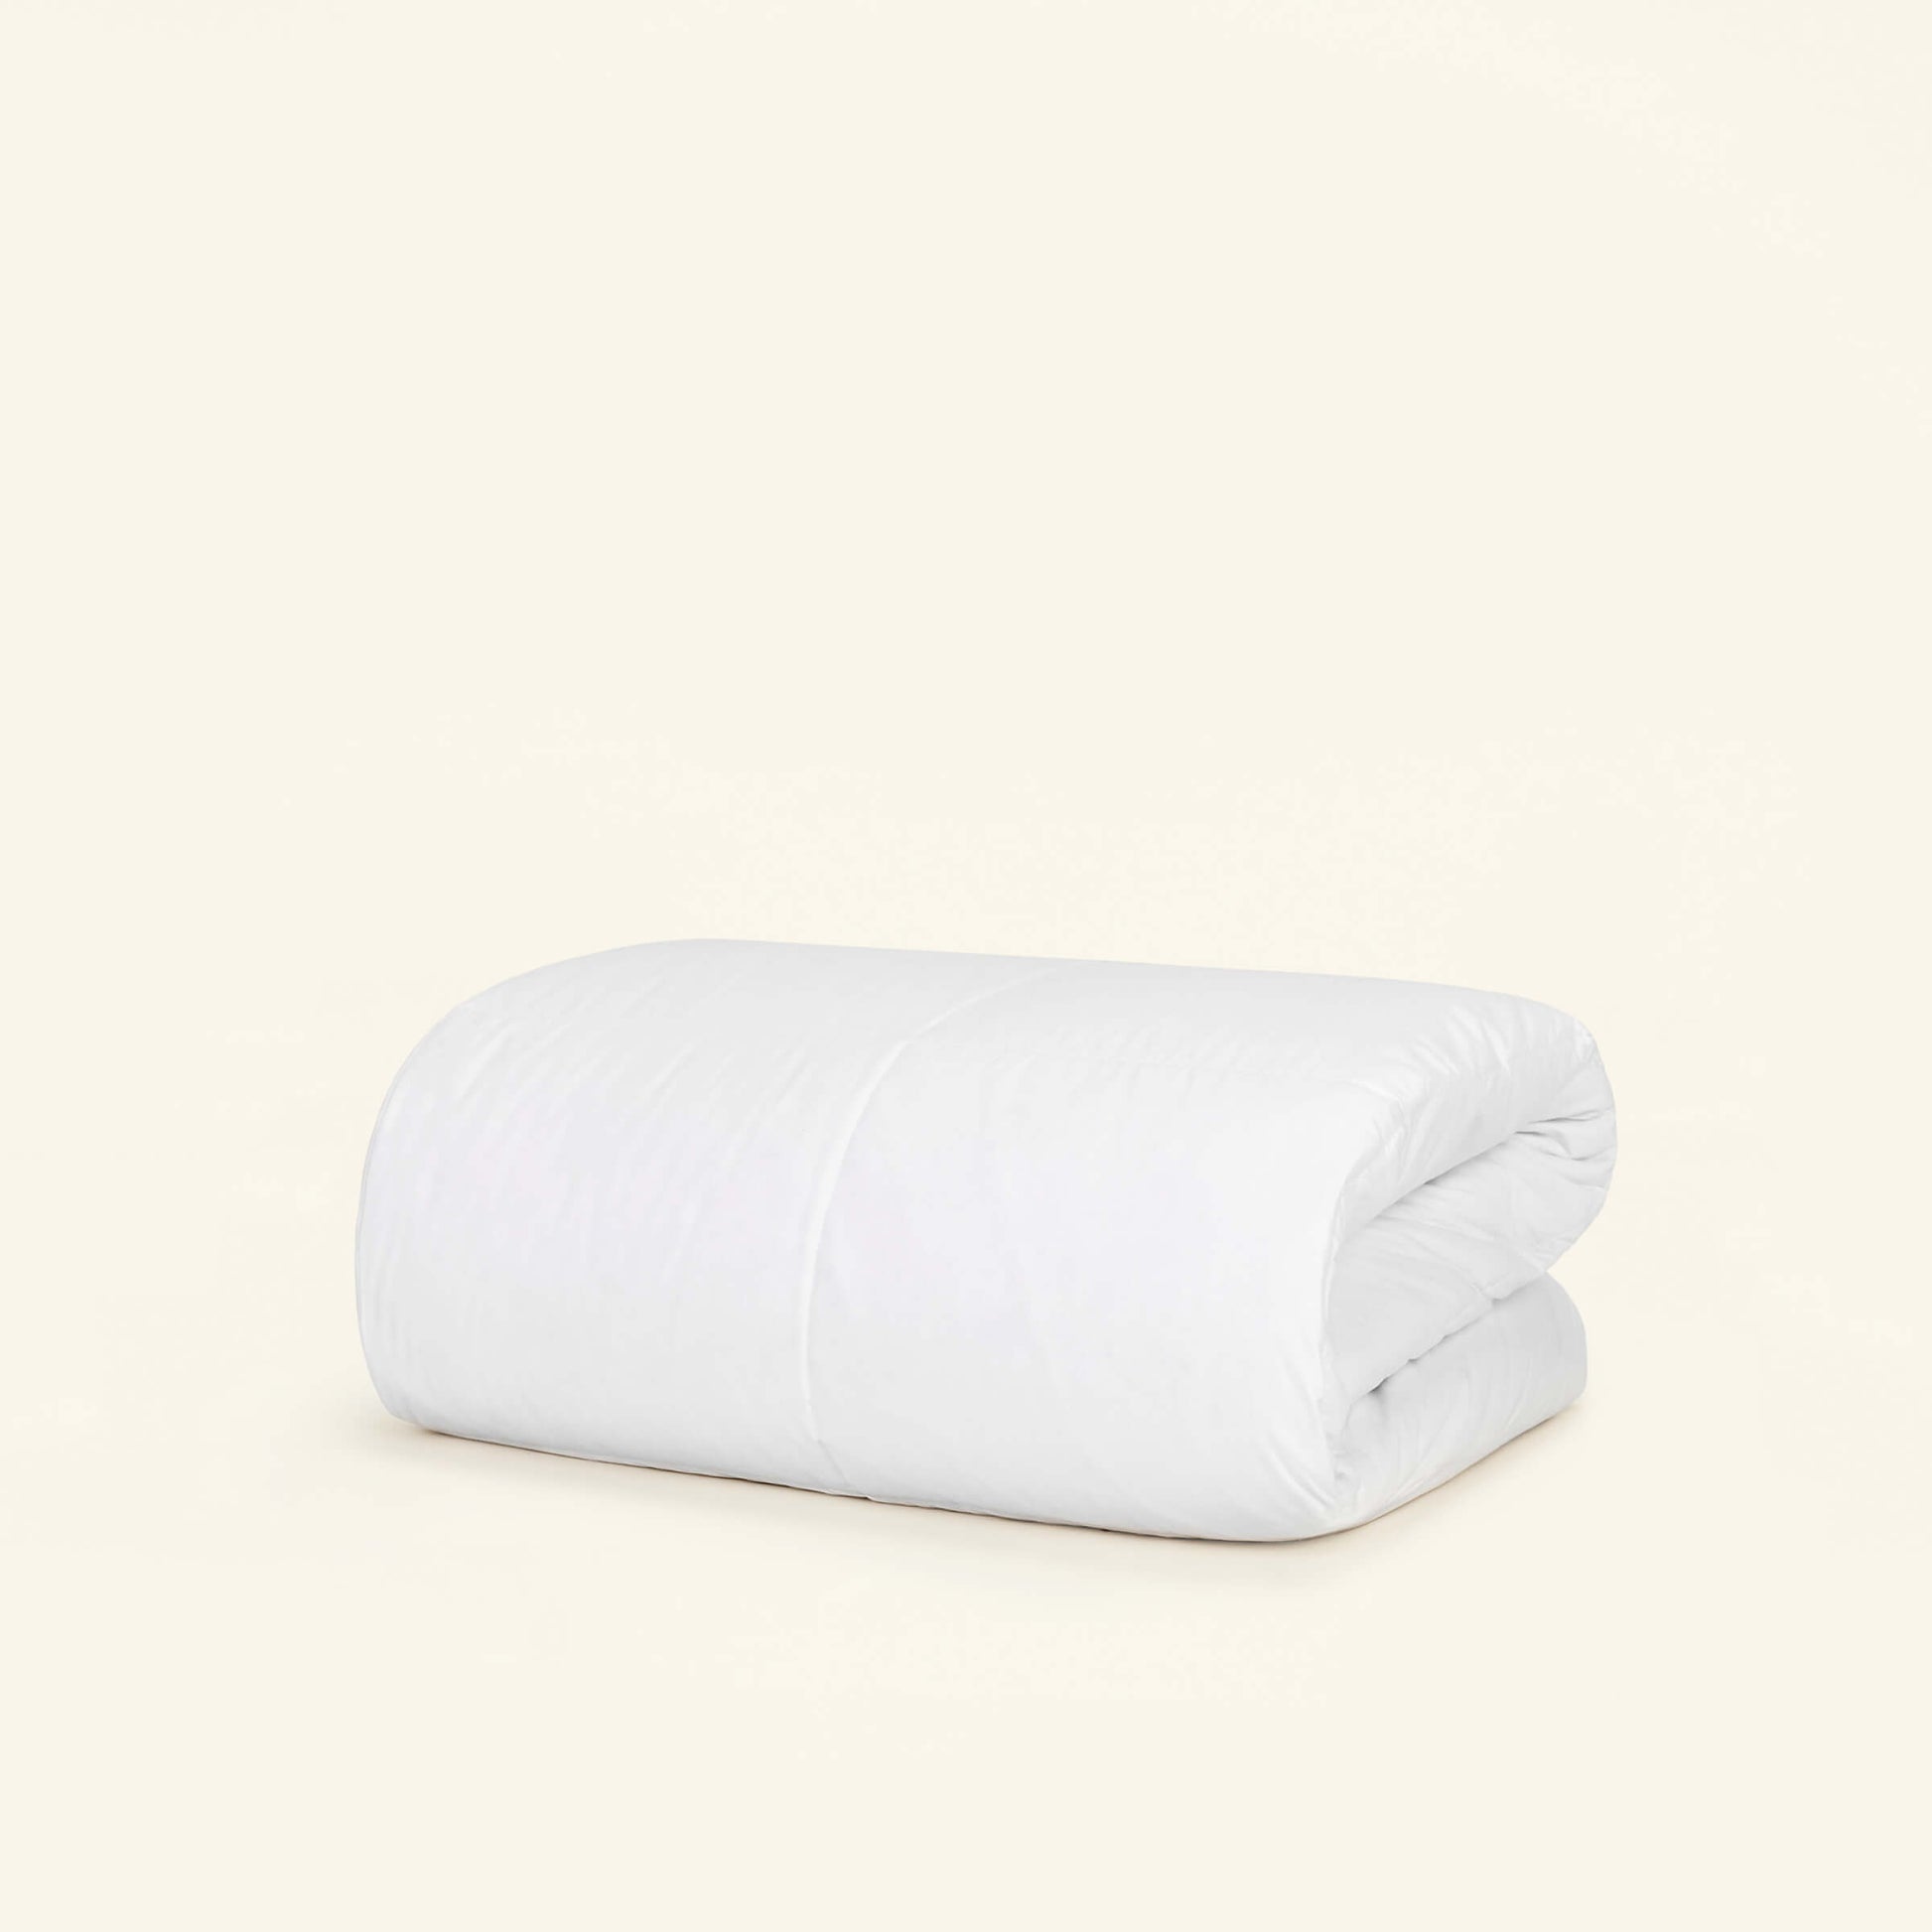 The Slumber Cloud Down Comforter made with temperature regulation technology